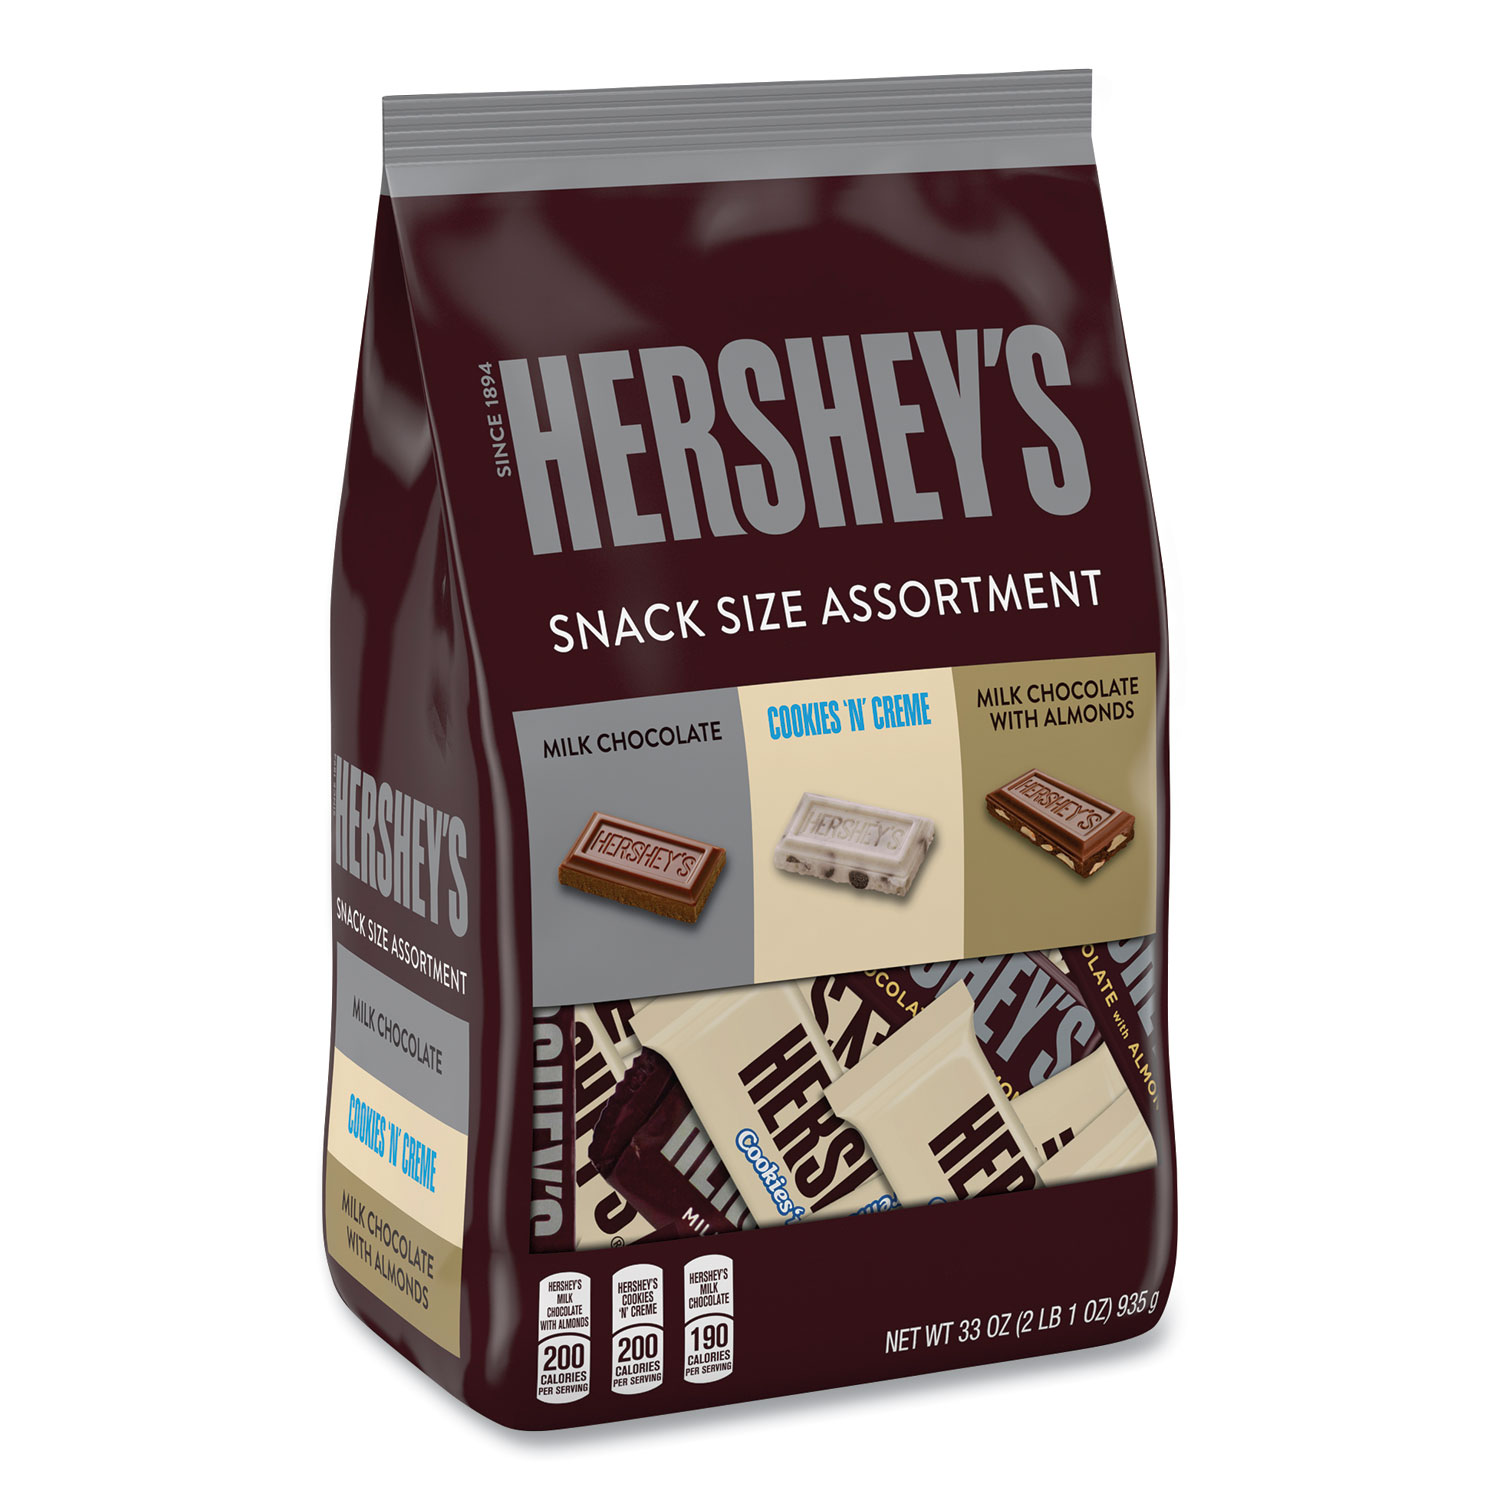  Hershey's 99510 Snack Size Assortment Bag, Assorted, 33 oz, Free Delivery in 1-4 Business Days (GRR24600284) 